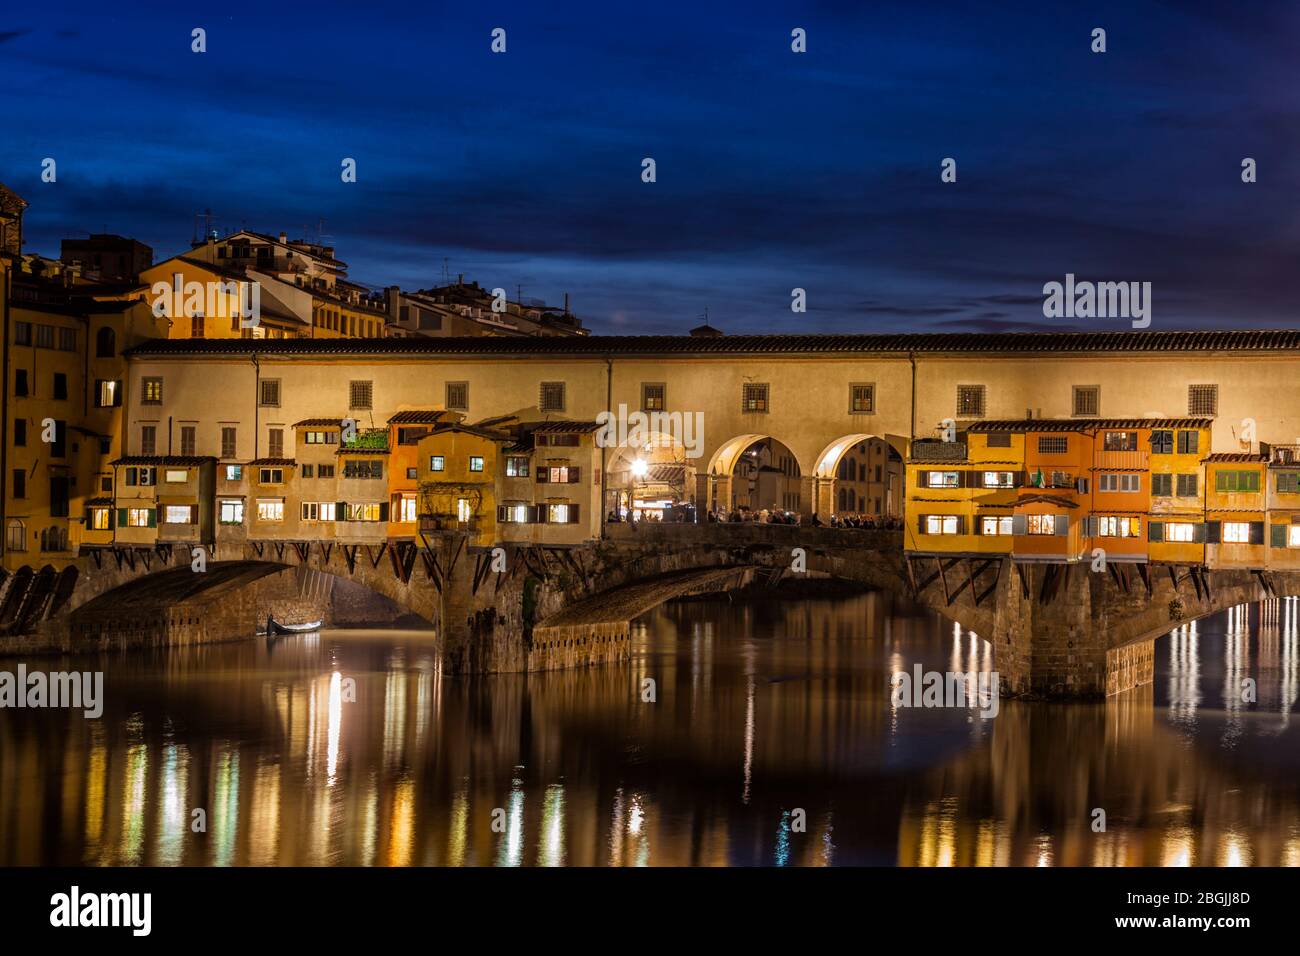 Florence. Image of Ponte Vecchio in Florence, Italy at dusk Stock Photo